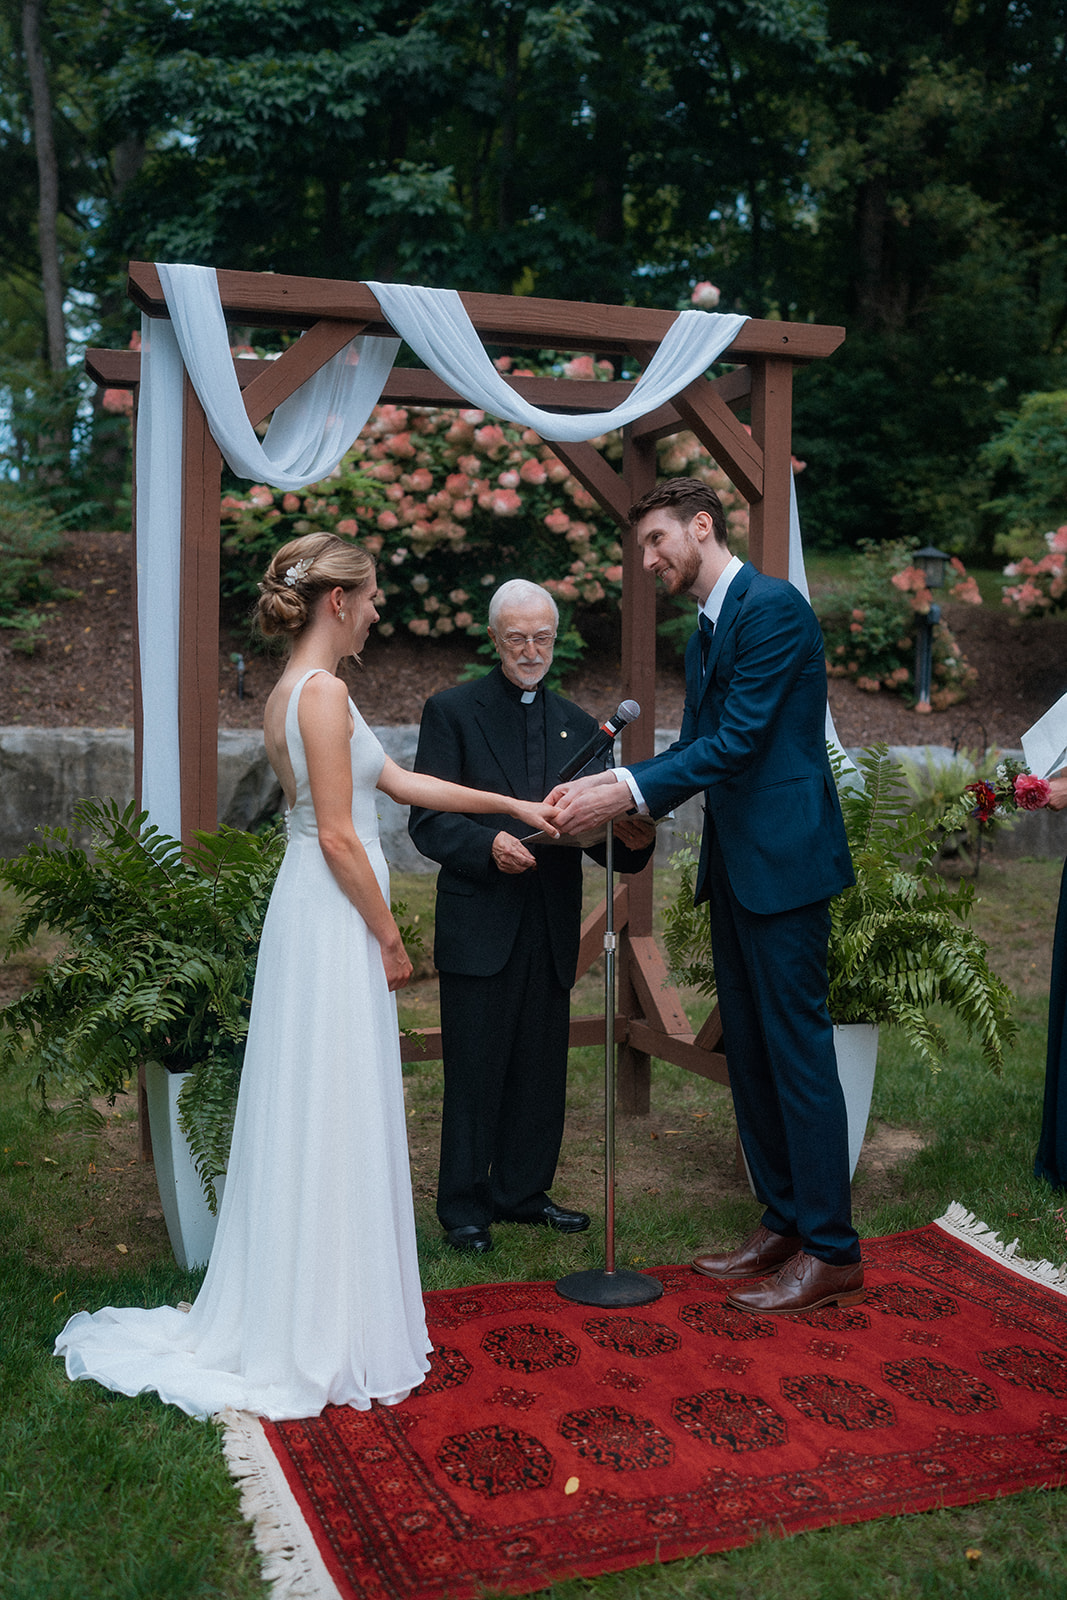 Bride and groom exchanging rings in their outdoor wedding ceremony in the Grove at Springside Inn